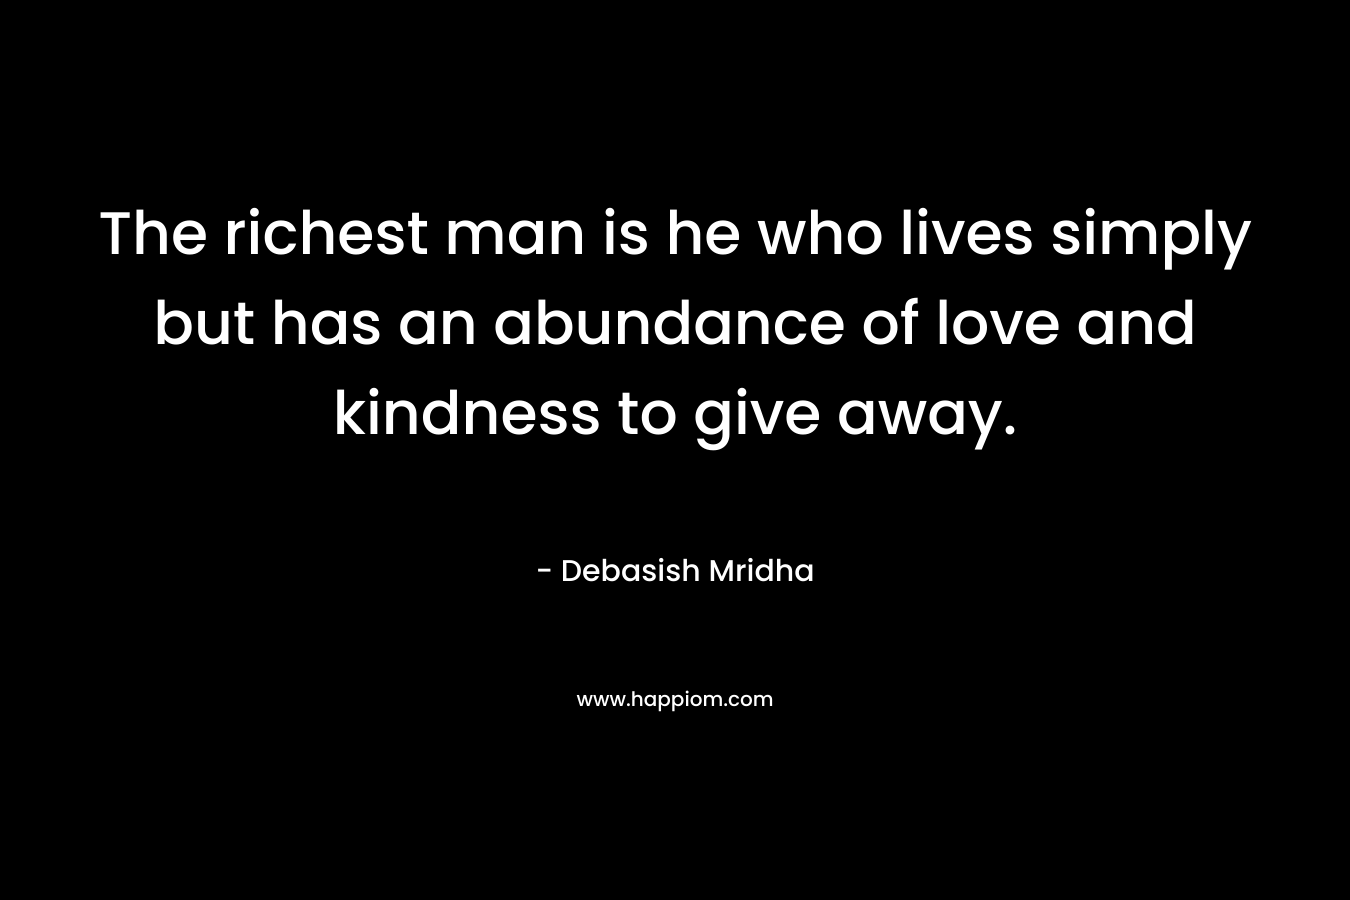 The richest man is he who lives simply but has an abundance of love and kindness to give away.